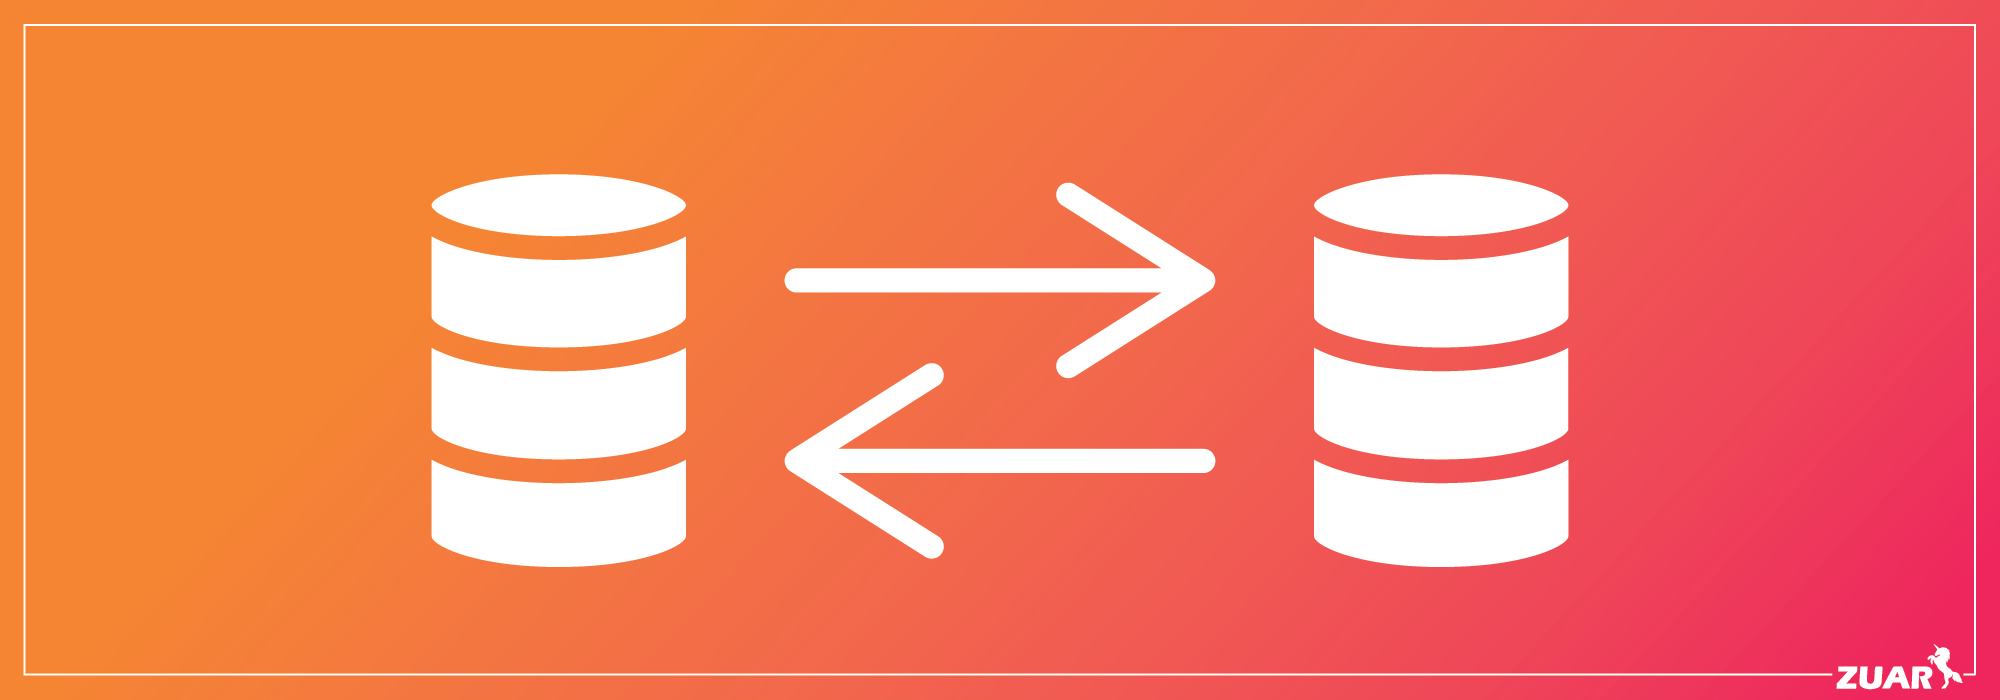 How to migrate data